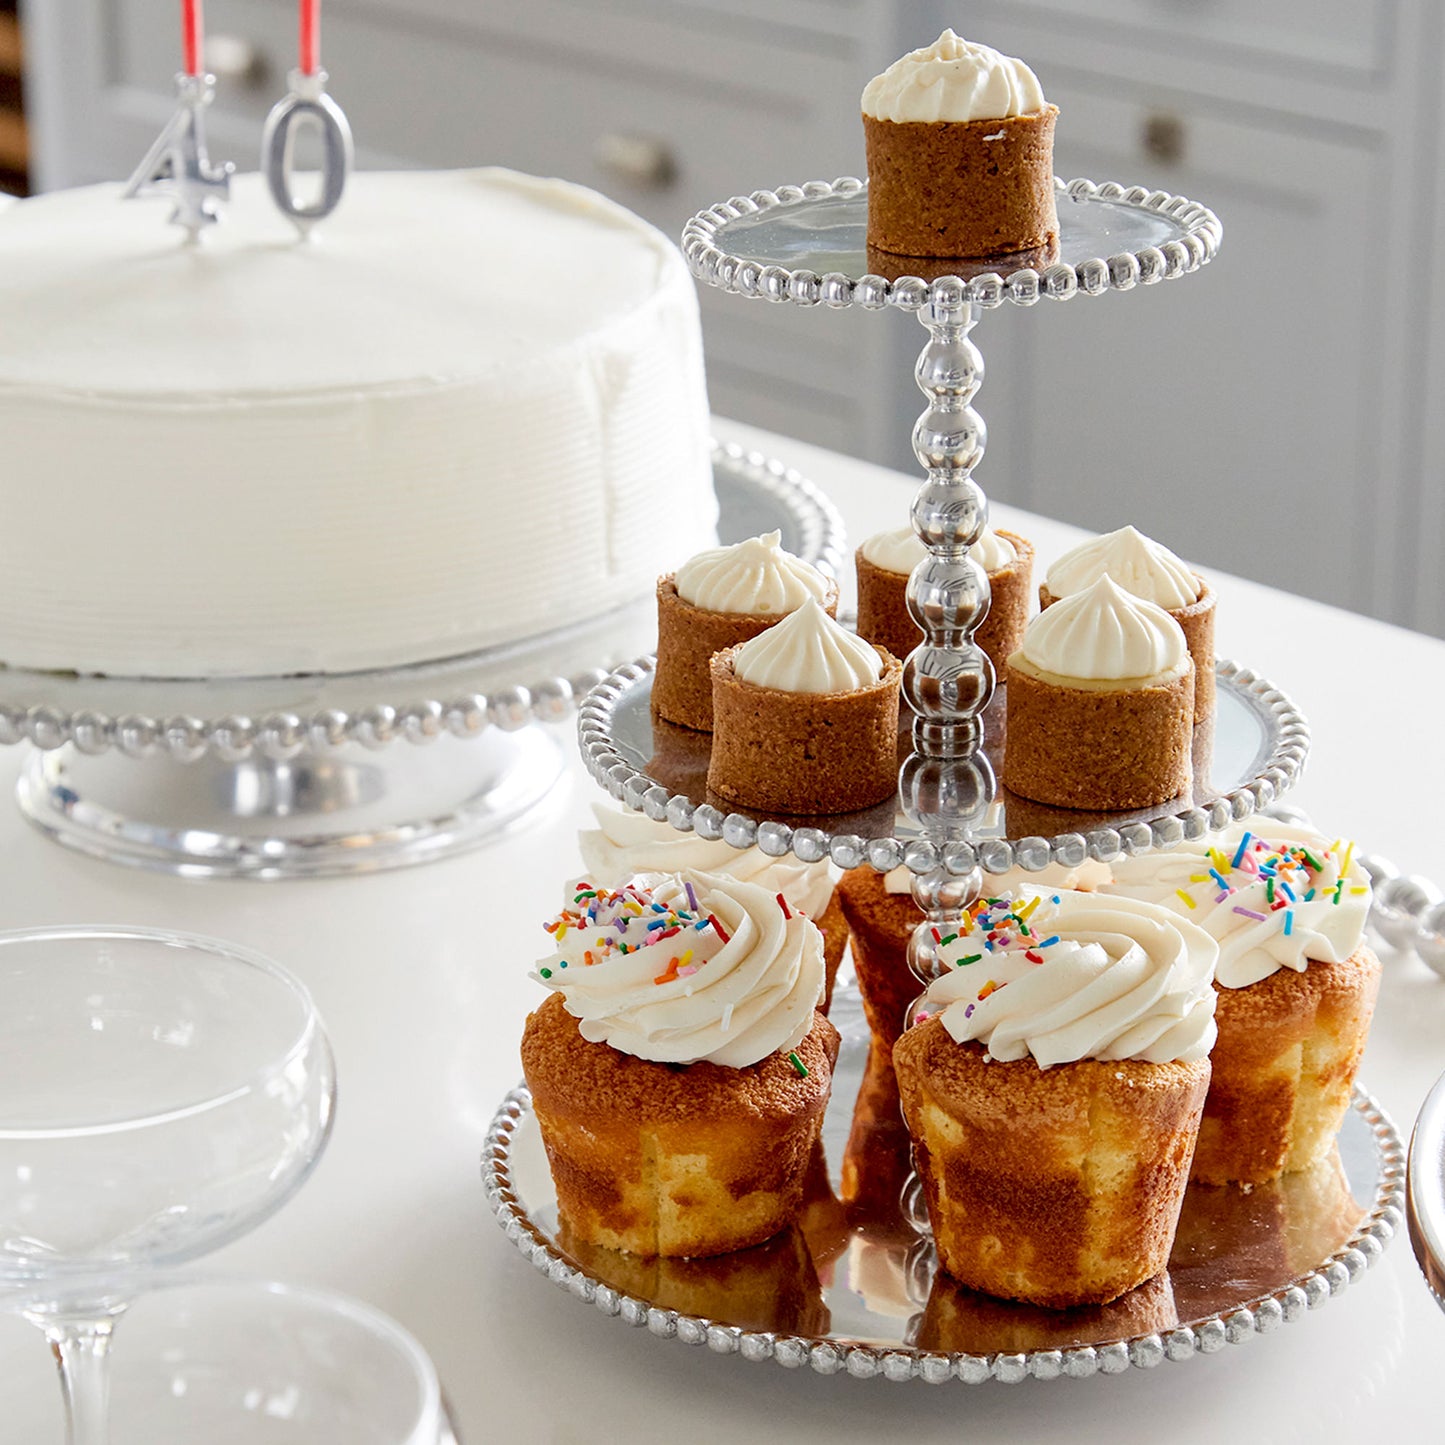 Silver Number Candle Holder Set (For Cake) on a cake and cupcakes on a cake stand